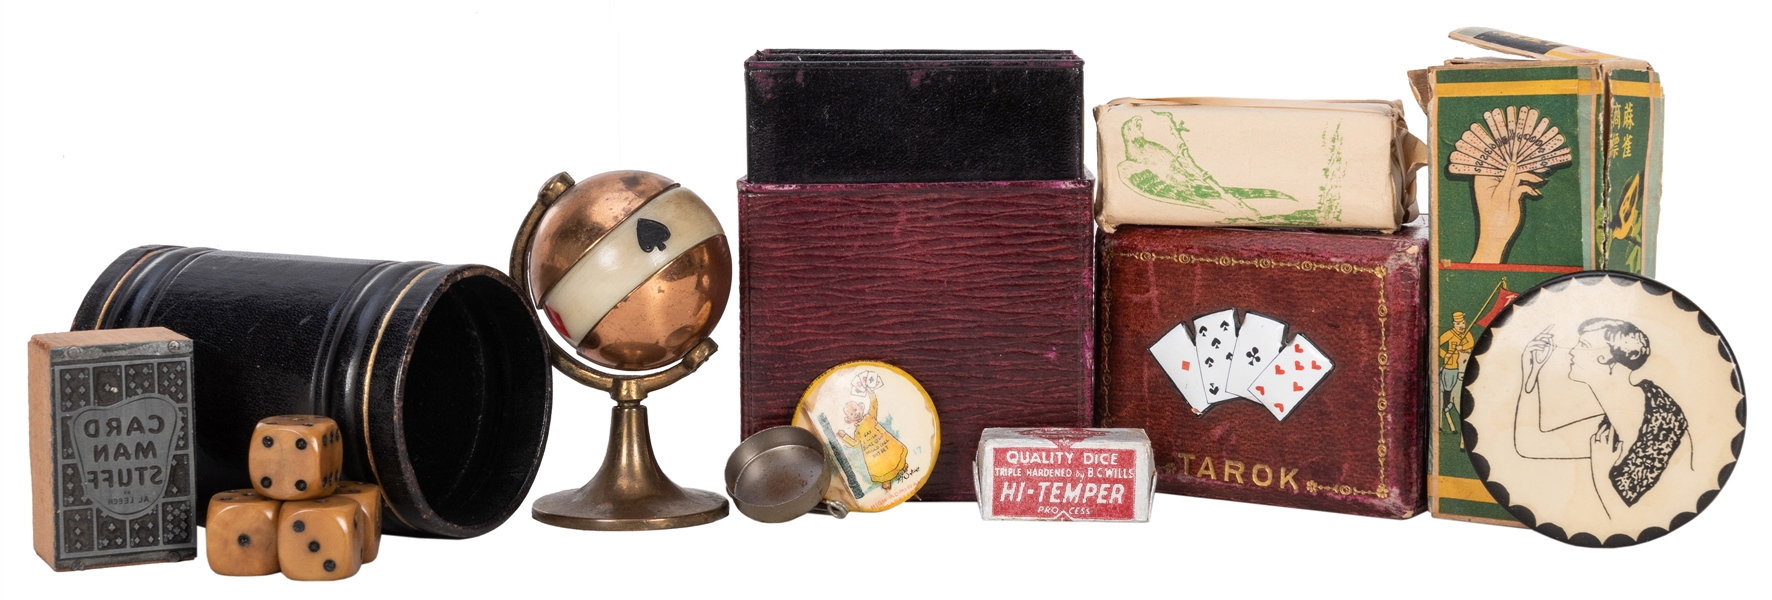  Group of Miscellaneous Card Playing and Gambling Collectibles.